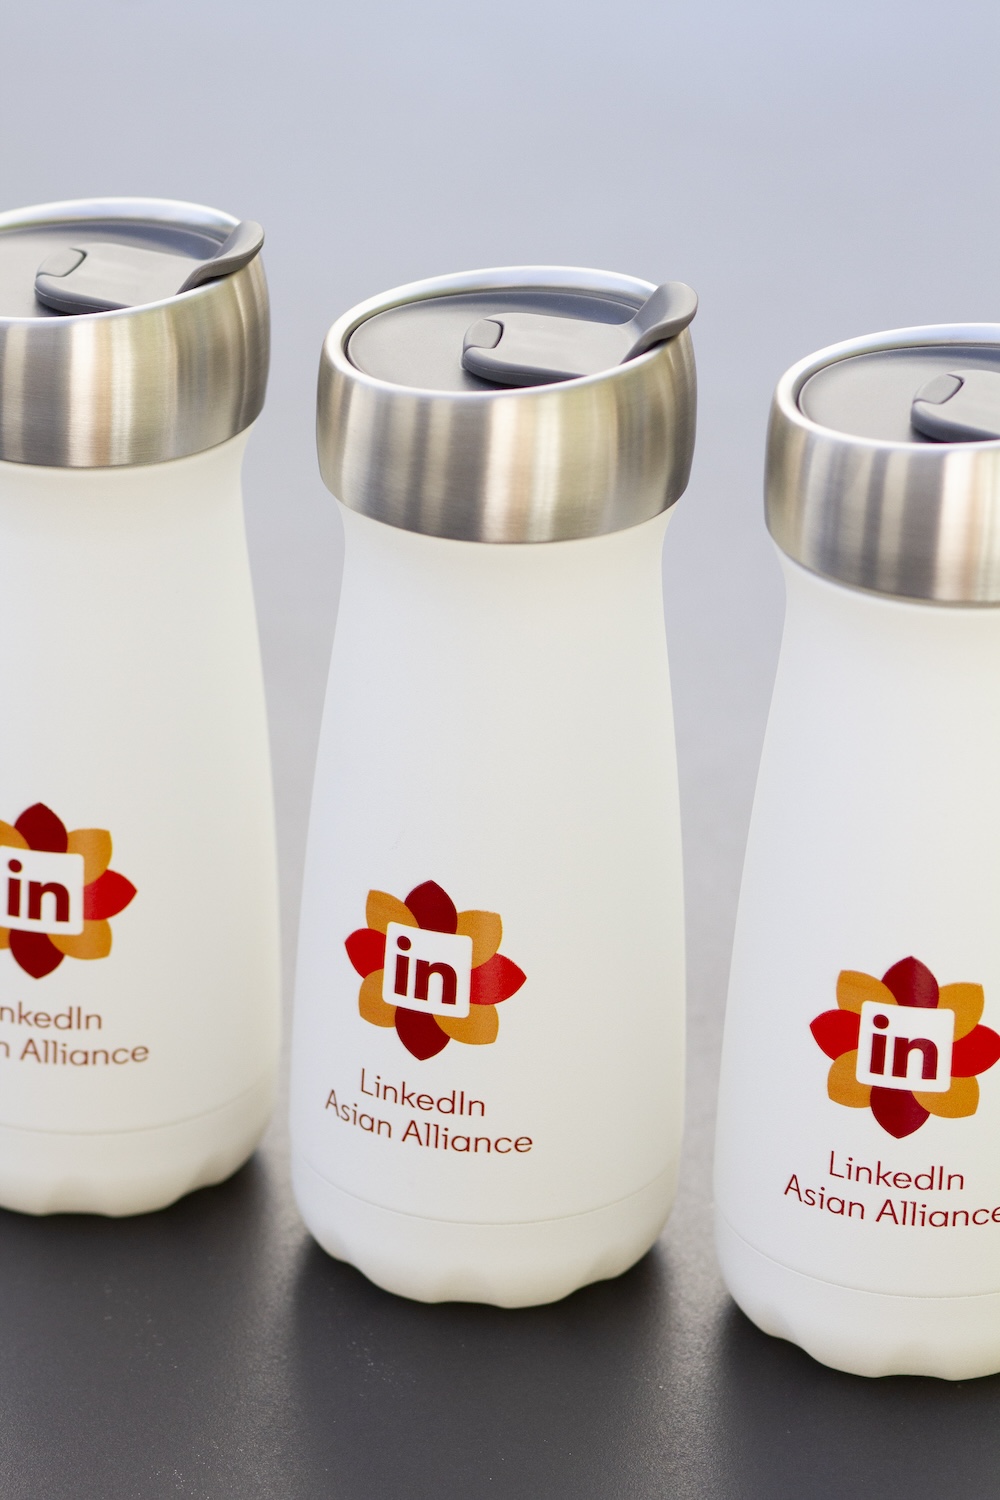 Custom branded LinkedIn mugs designed and curated by Swagger